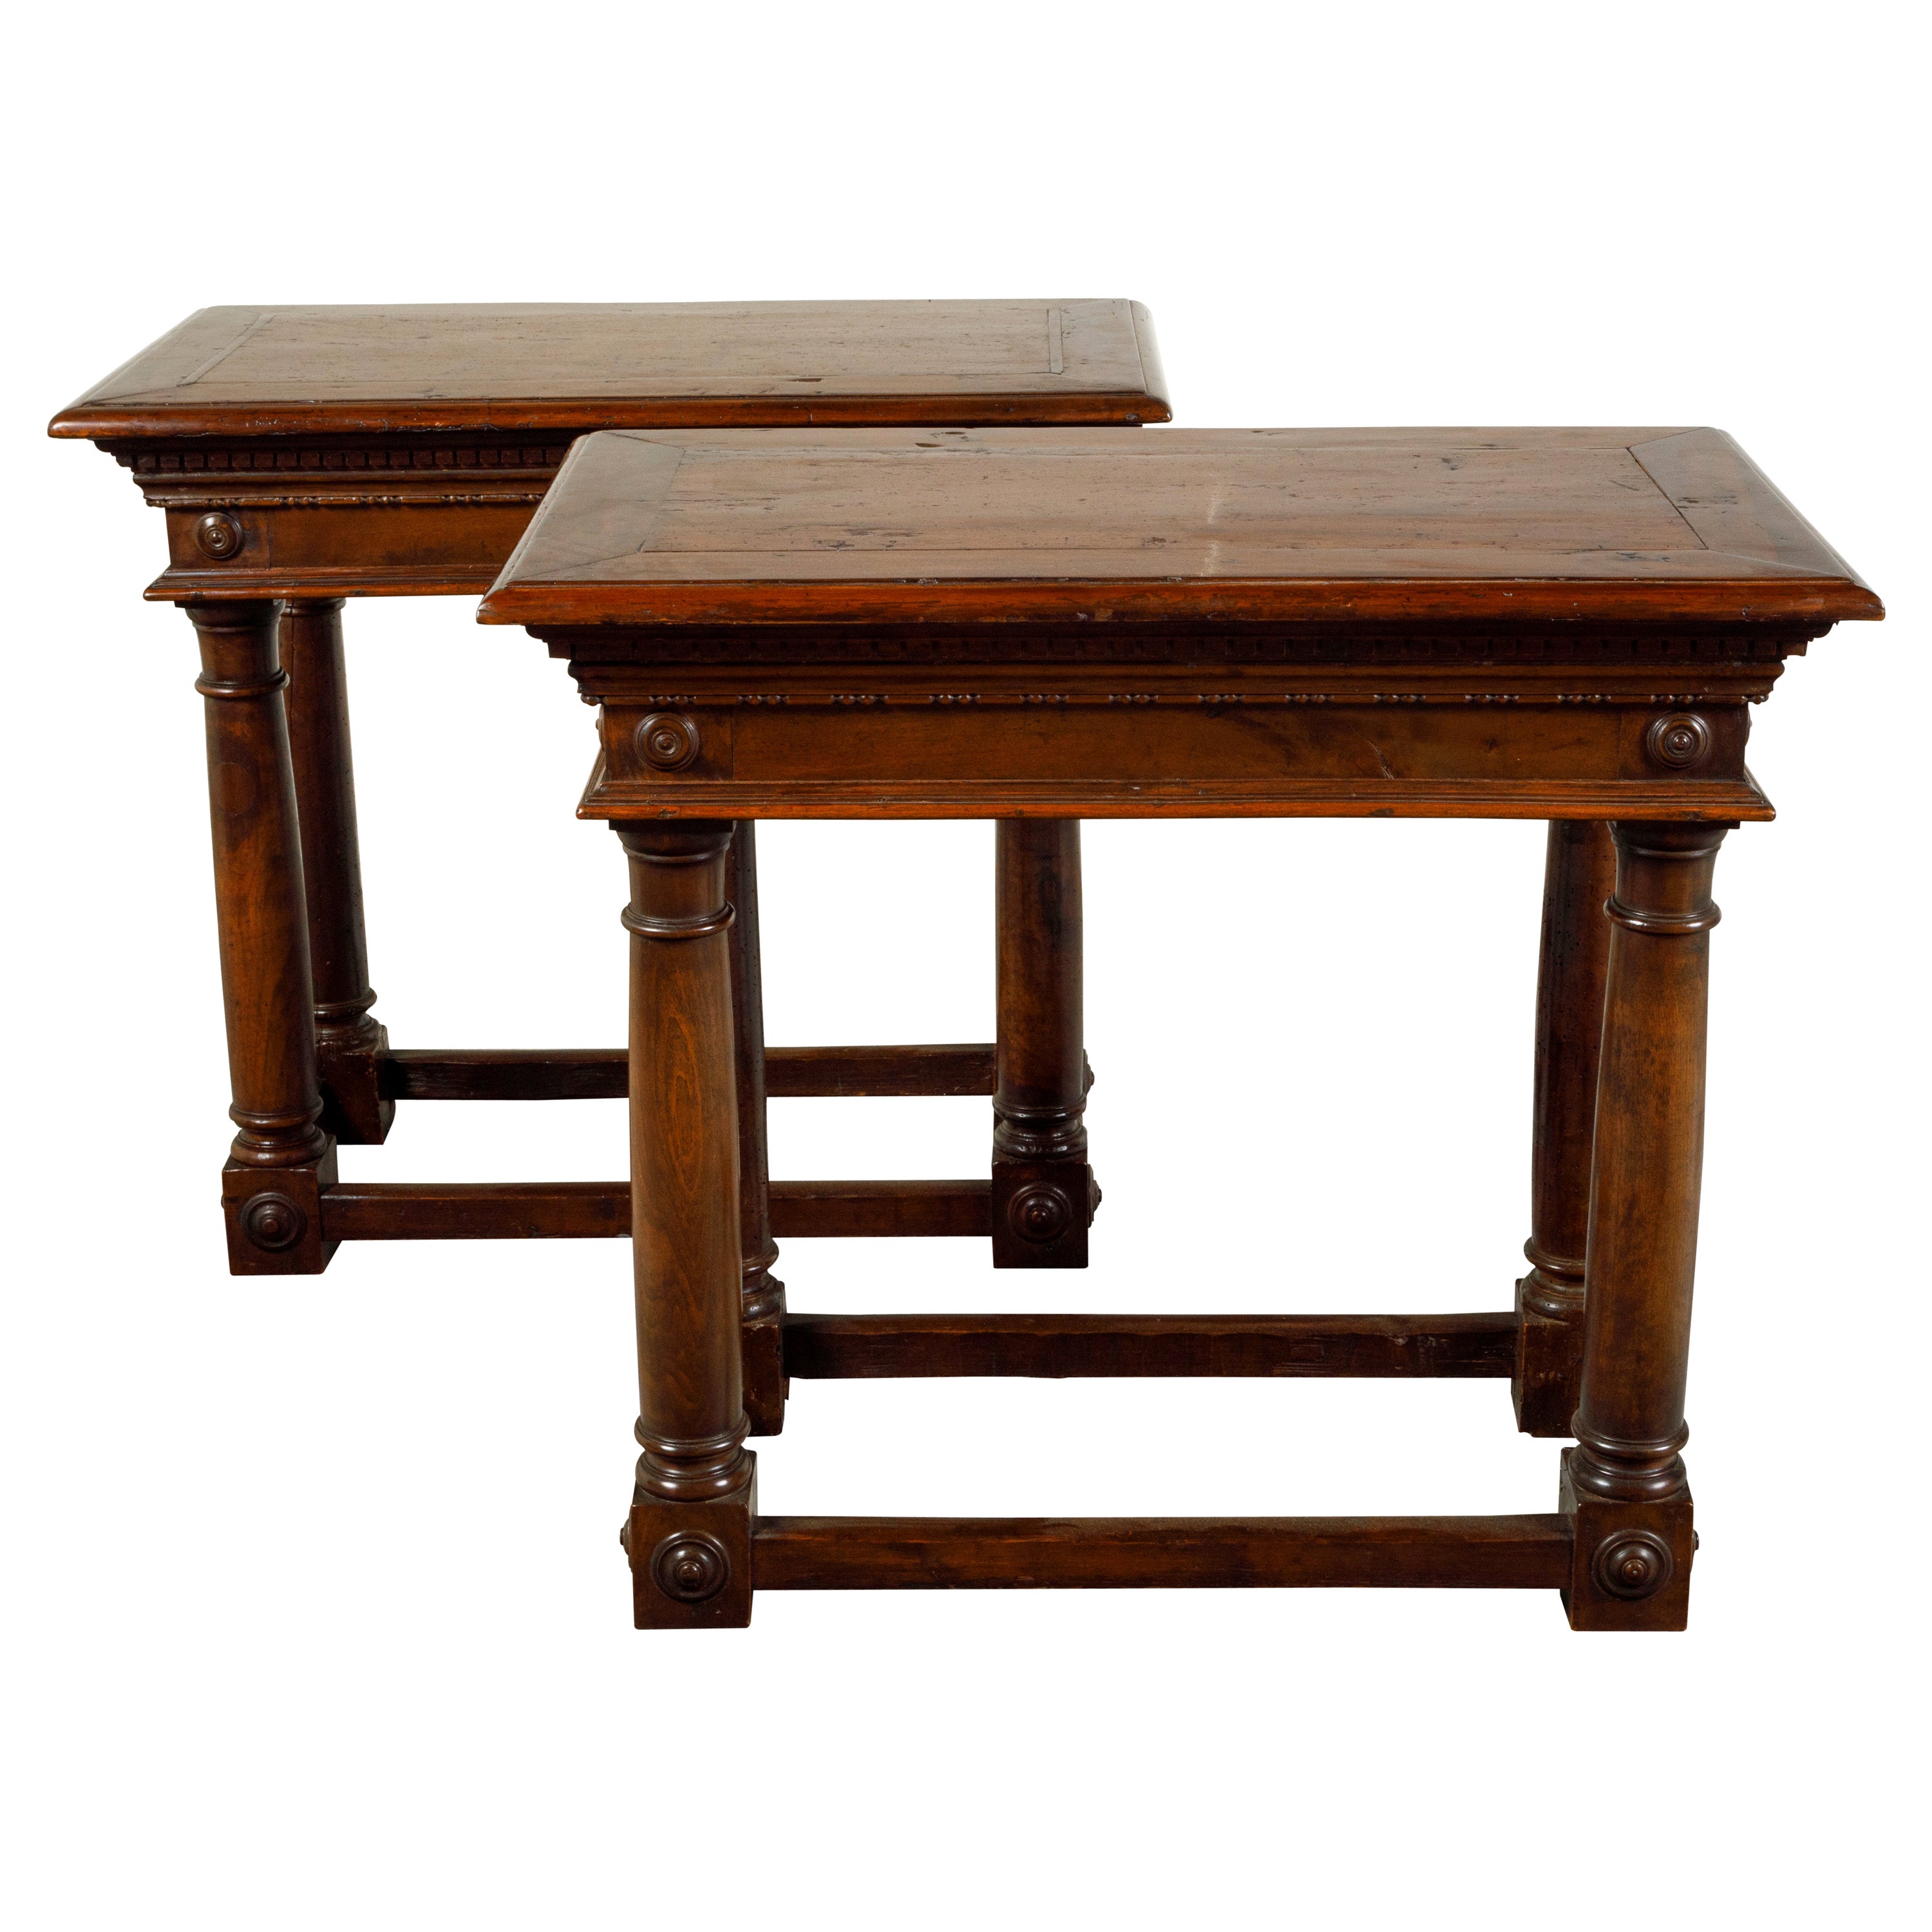 Pair of Italian 19th Century Carved Walnut Console Tables with Doric Columns For Sale